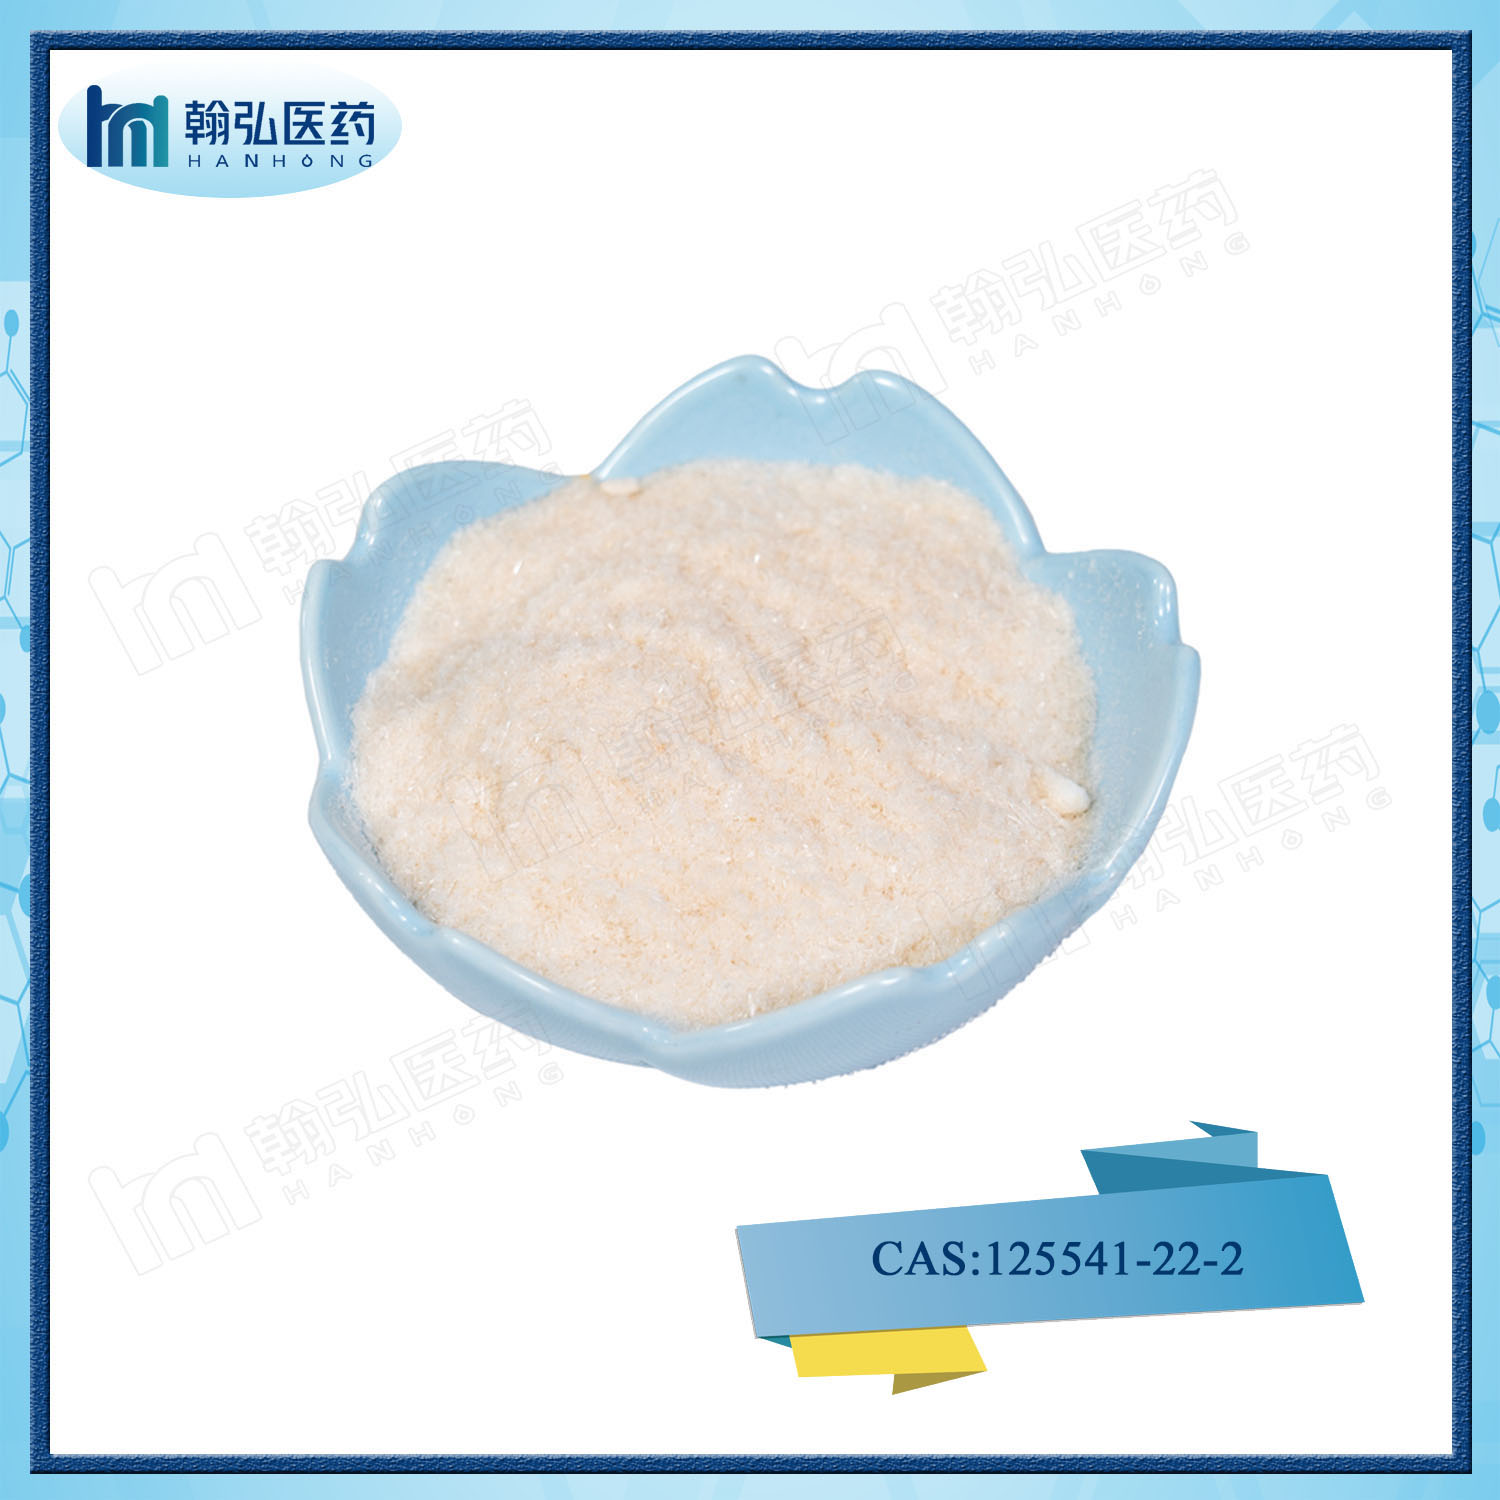 Factory Price Tert-Butyl 4-Anilinopiperidine-1-Carboxylate Pyridinecarboxylate CAS No.1255541-22-2 /19099-93-5 /79099-07-3/288573-56-8/1451-82-7 Whatsapp/Wechat: +8615927457486 WickrMe: Ccassie